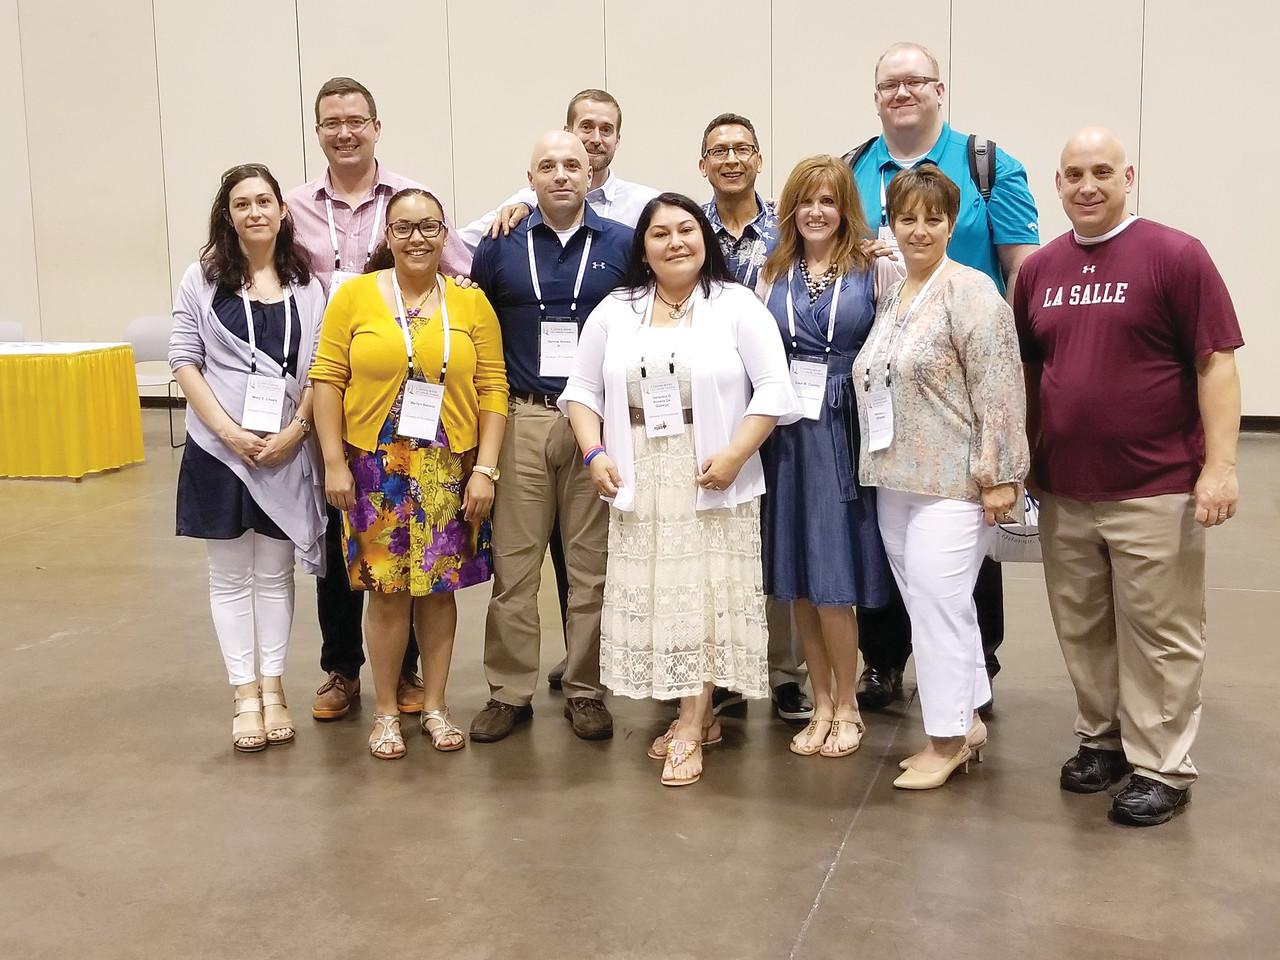 Delegates from the Diocese of Providence joined 3,500 participants from across the United States for the Convocation of Catholic Leaders in Orlando July 1- 4. From left to right: Mary Cheely, James Hill, Marlyn Batista, Dennis Sousa, Edward Trendowski, Varsobia Acosta de Gallego, Javier Gallego, Lisa Cooley, Daniel Mahoney, Melissa DiFonzo, Deacon Gregory Albanese.